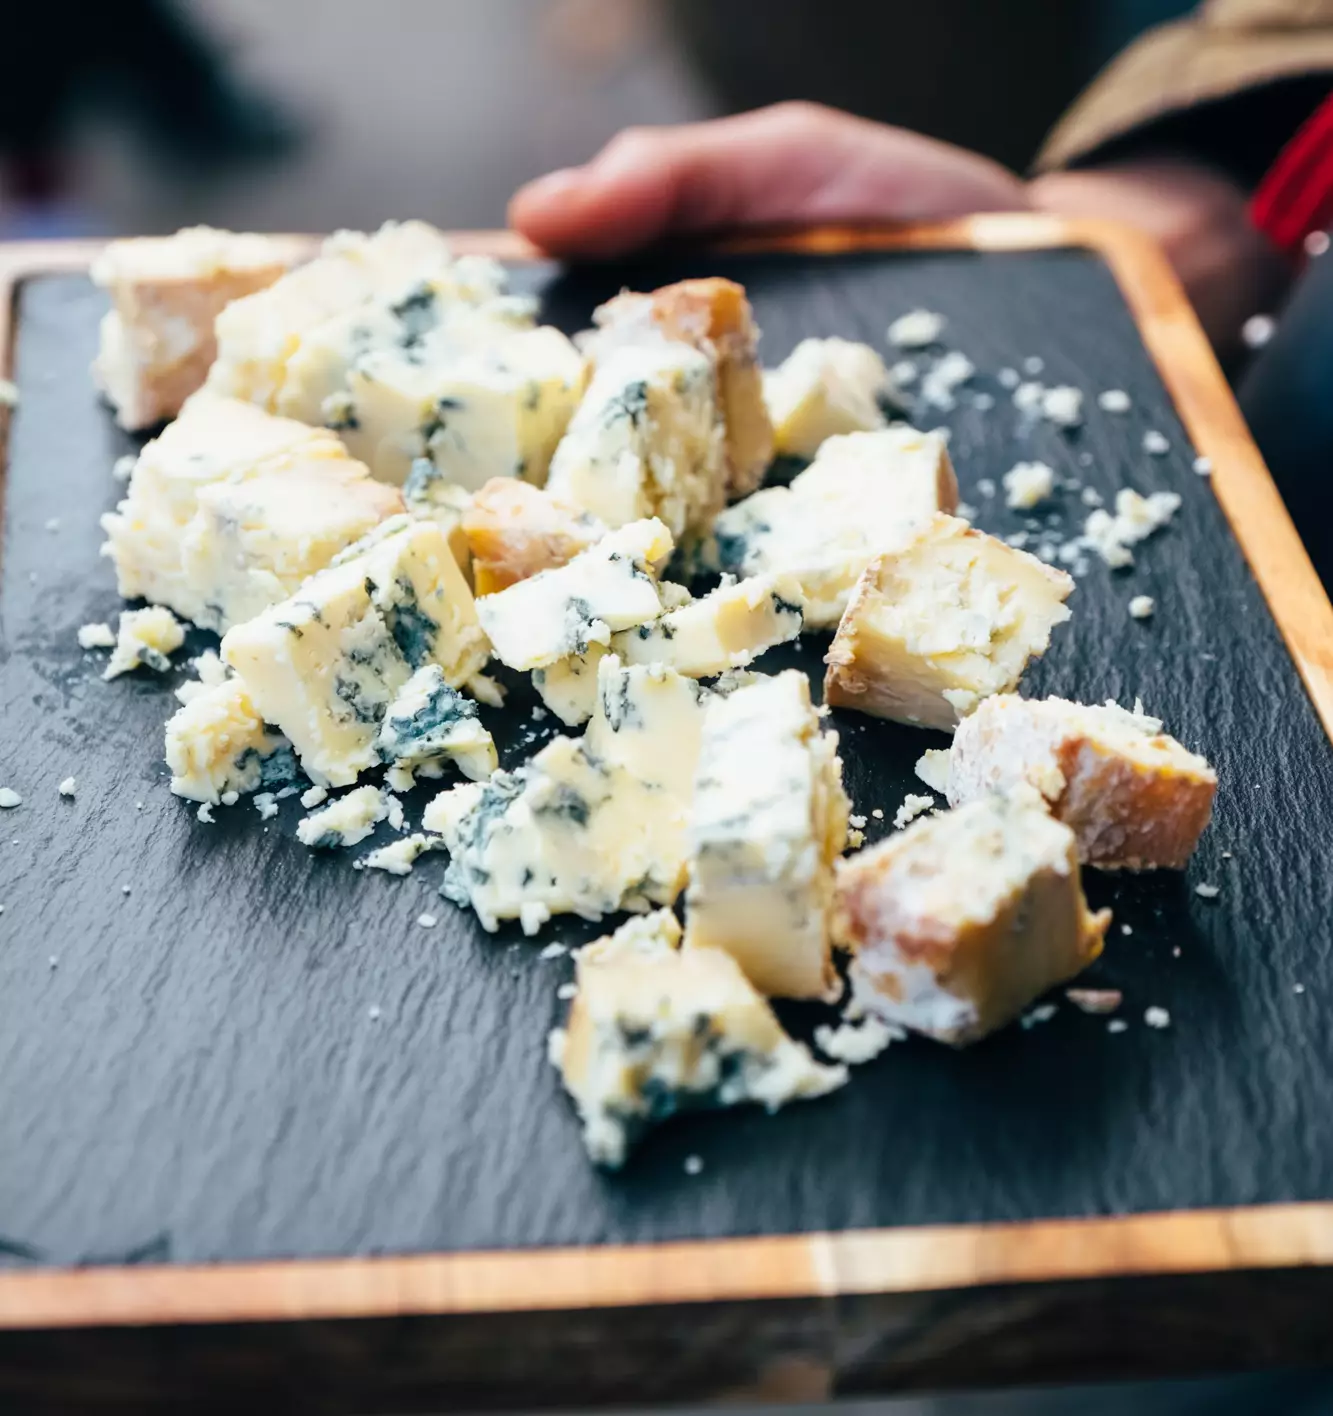 There will be a variety of cheese to try from camembert to brie and even a special Prosecco-infused cheese (